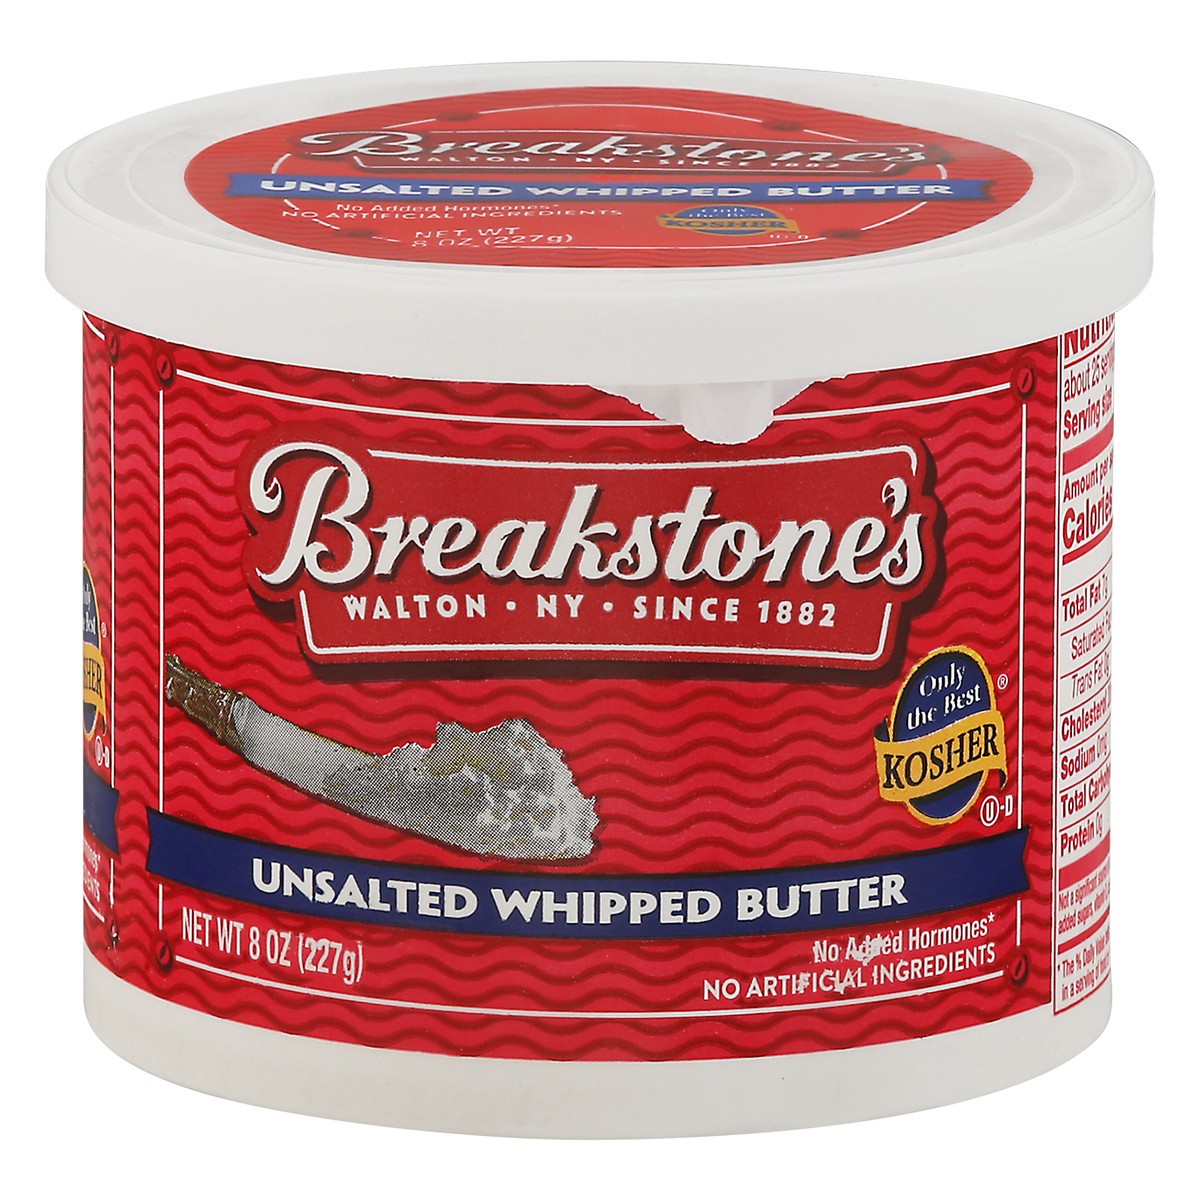 slide 1 of 9, Breakstone's Whipped Butter, Unsalted, 8 ct